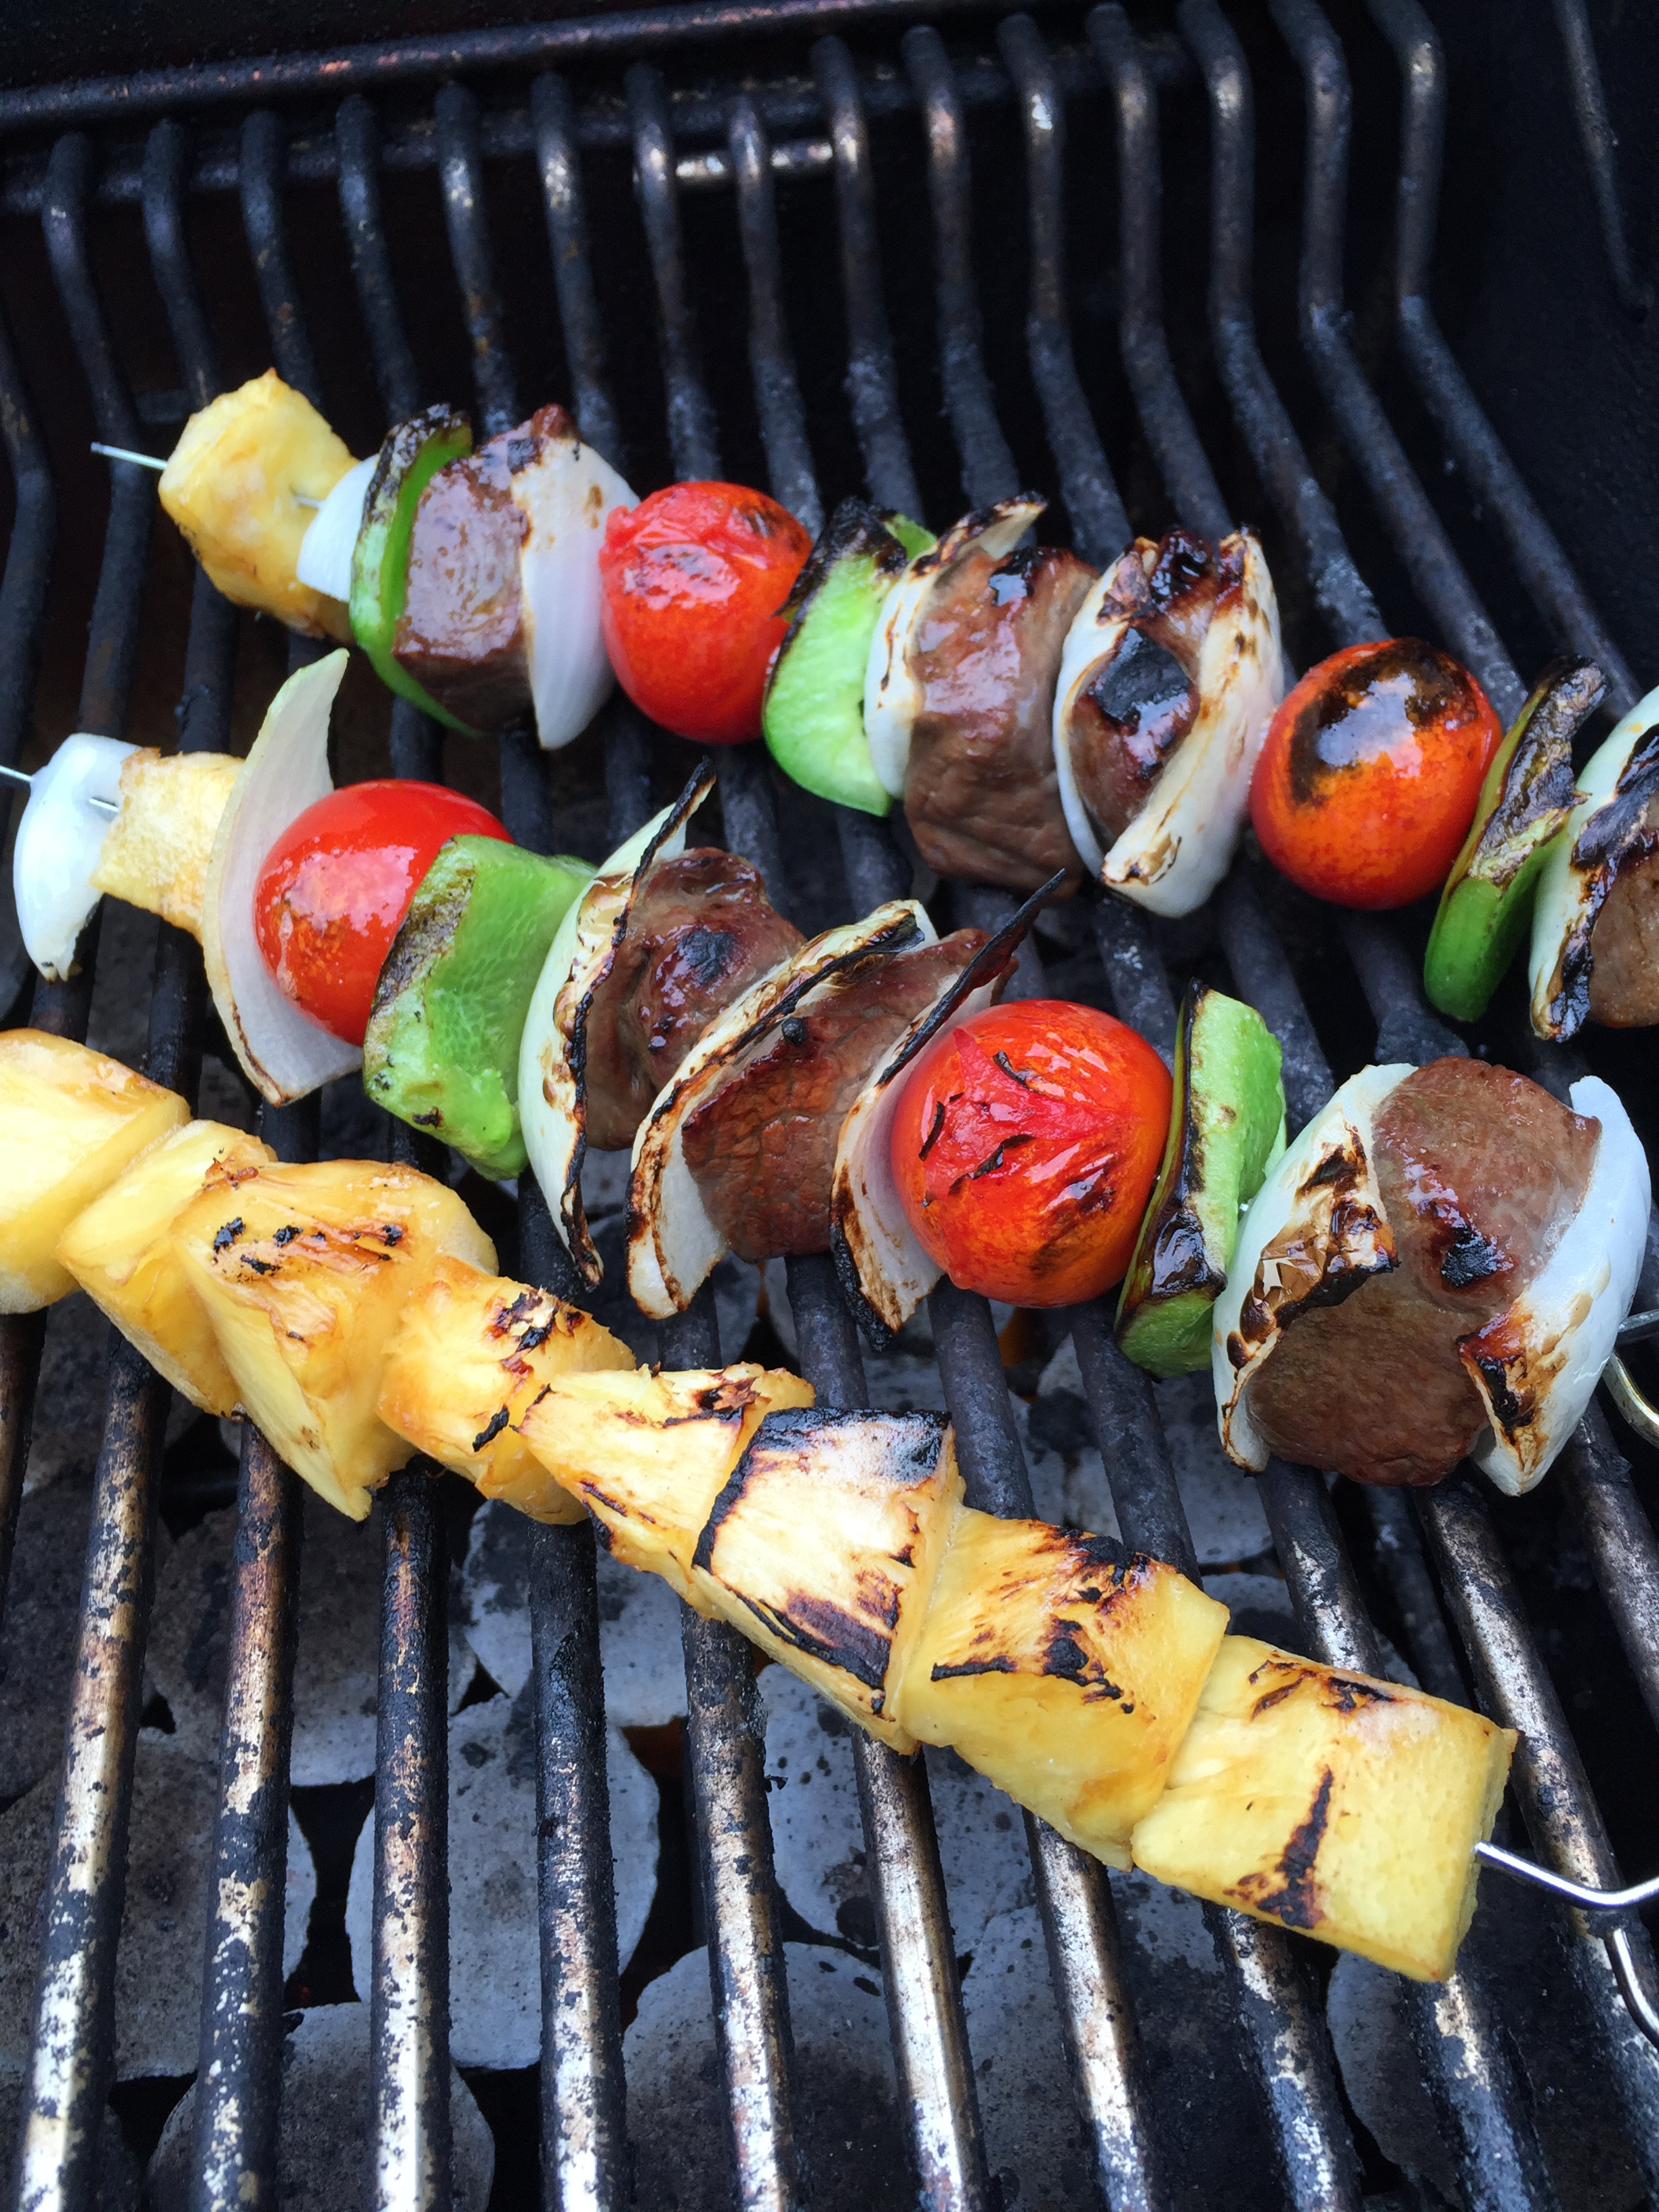 Middle Eastern Kabobs Recipes
 beef shish kabob marinade middle eastern